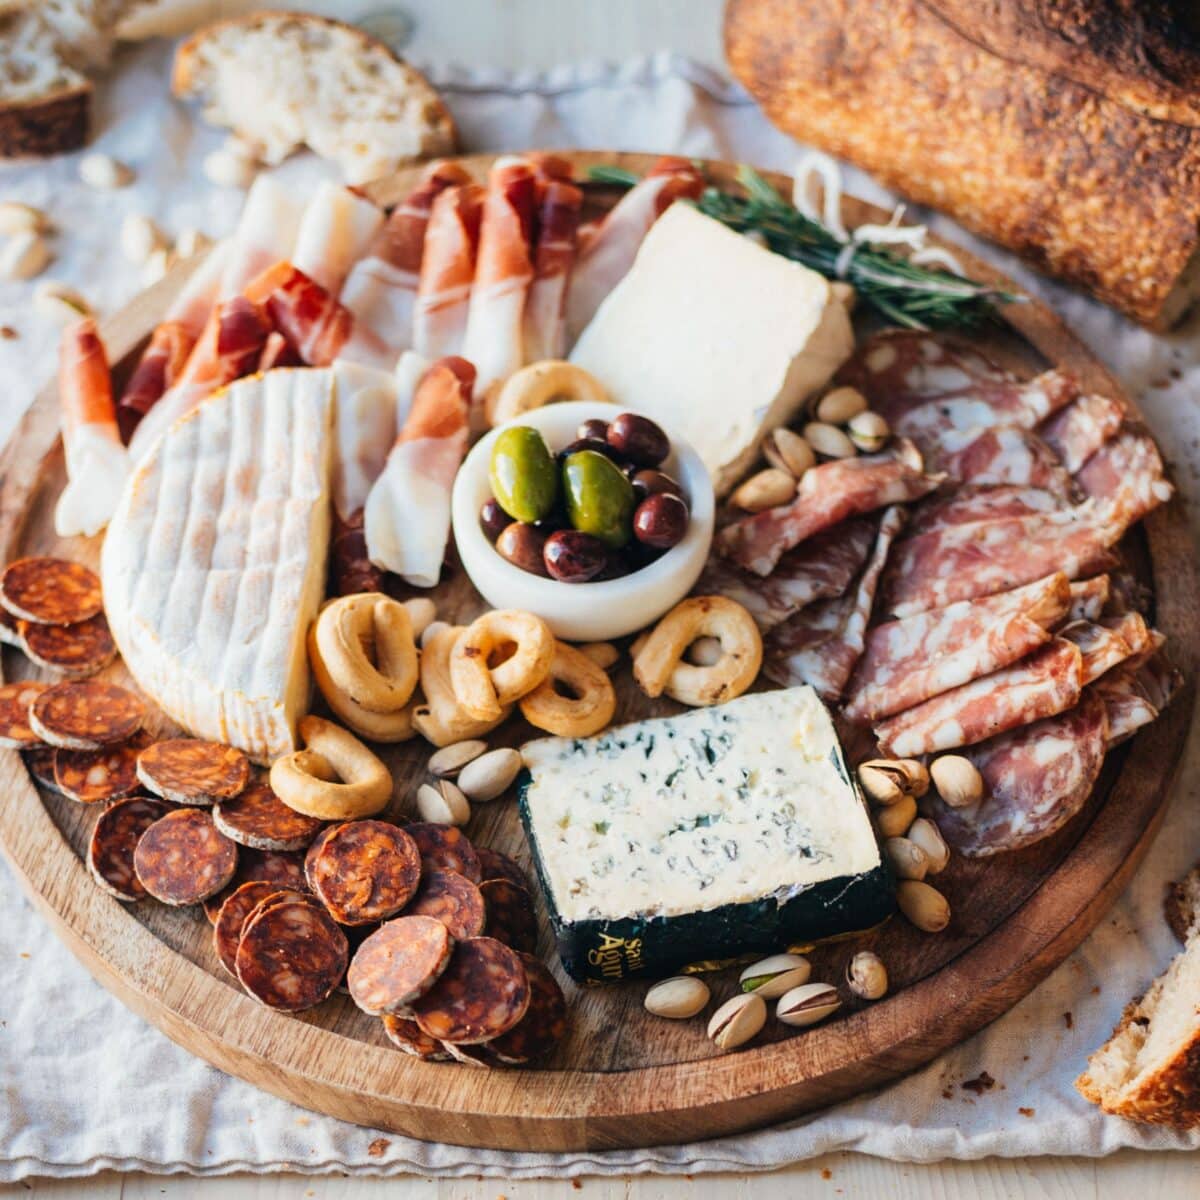 Cheese platter with cold cuts